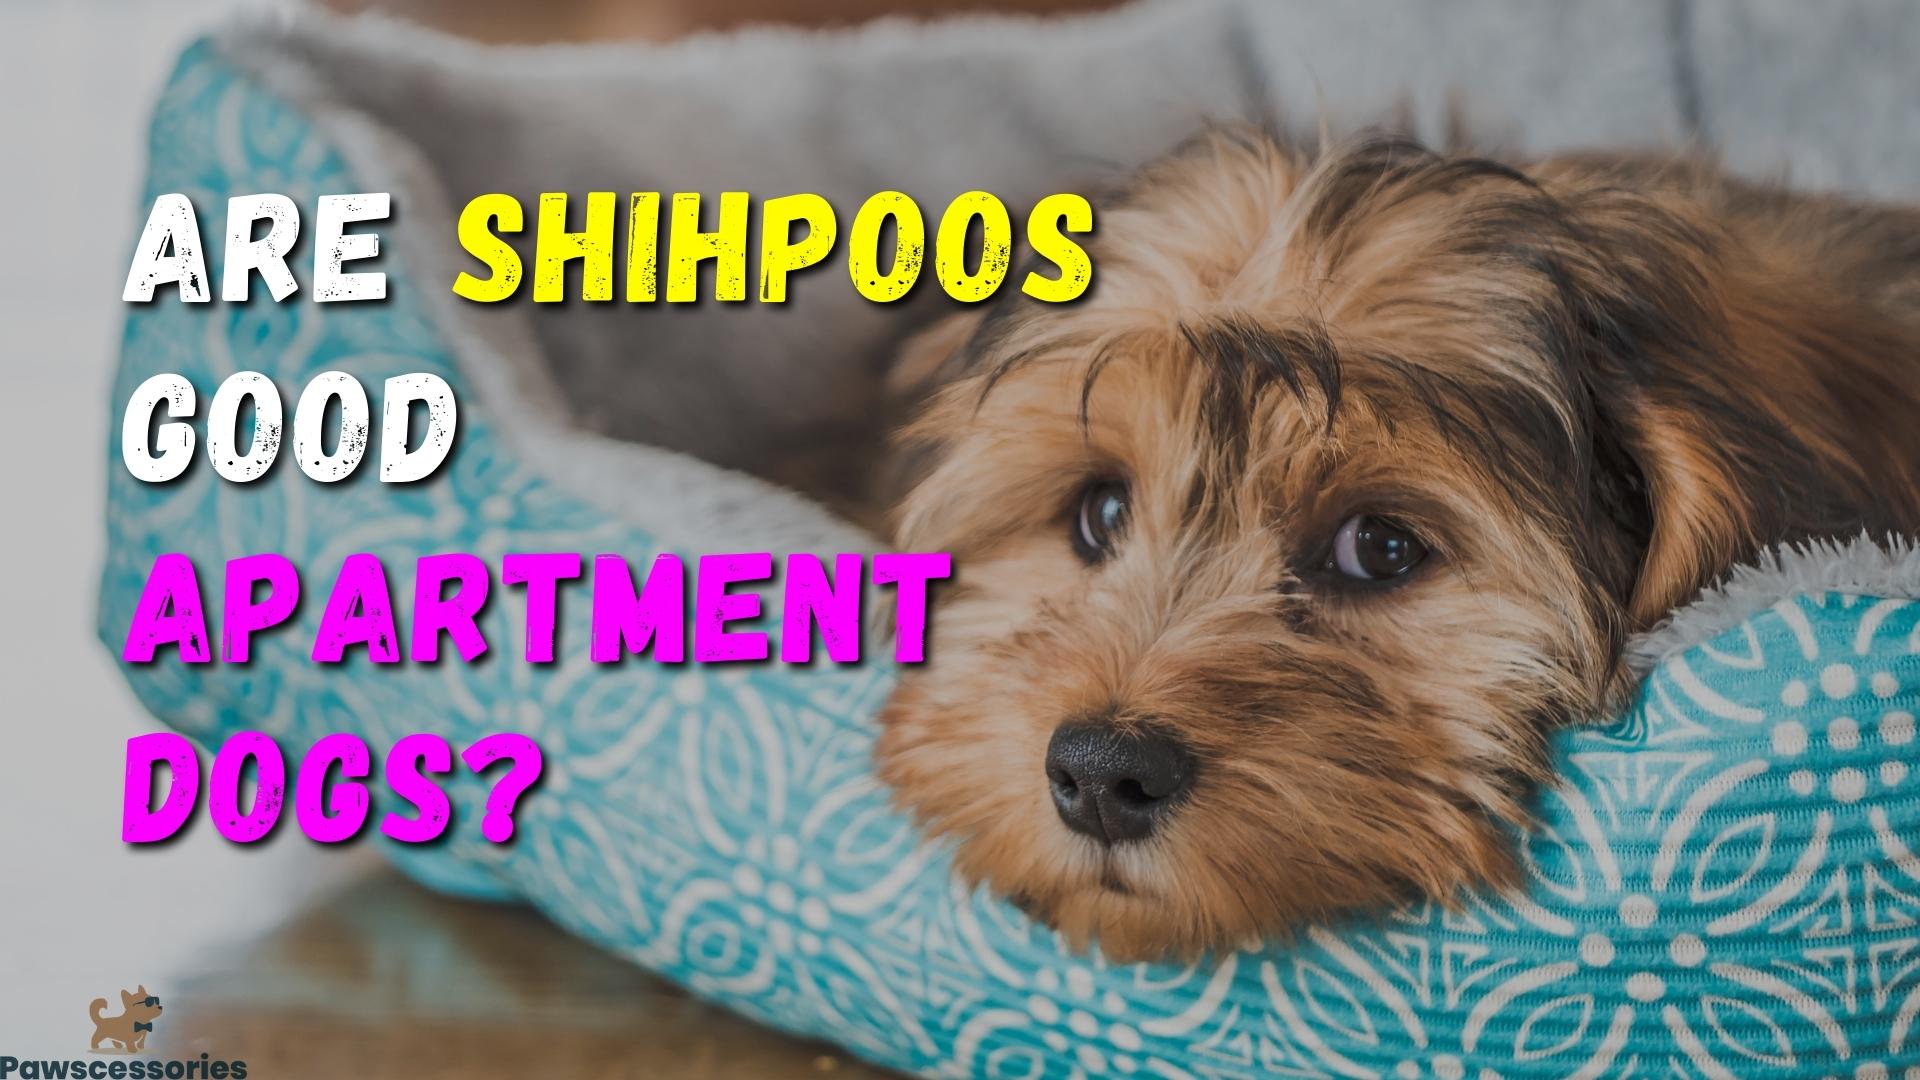 8 Reasons Shih Poos Make Great Apartment Dogs + Tips